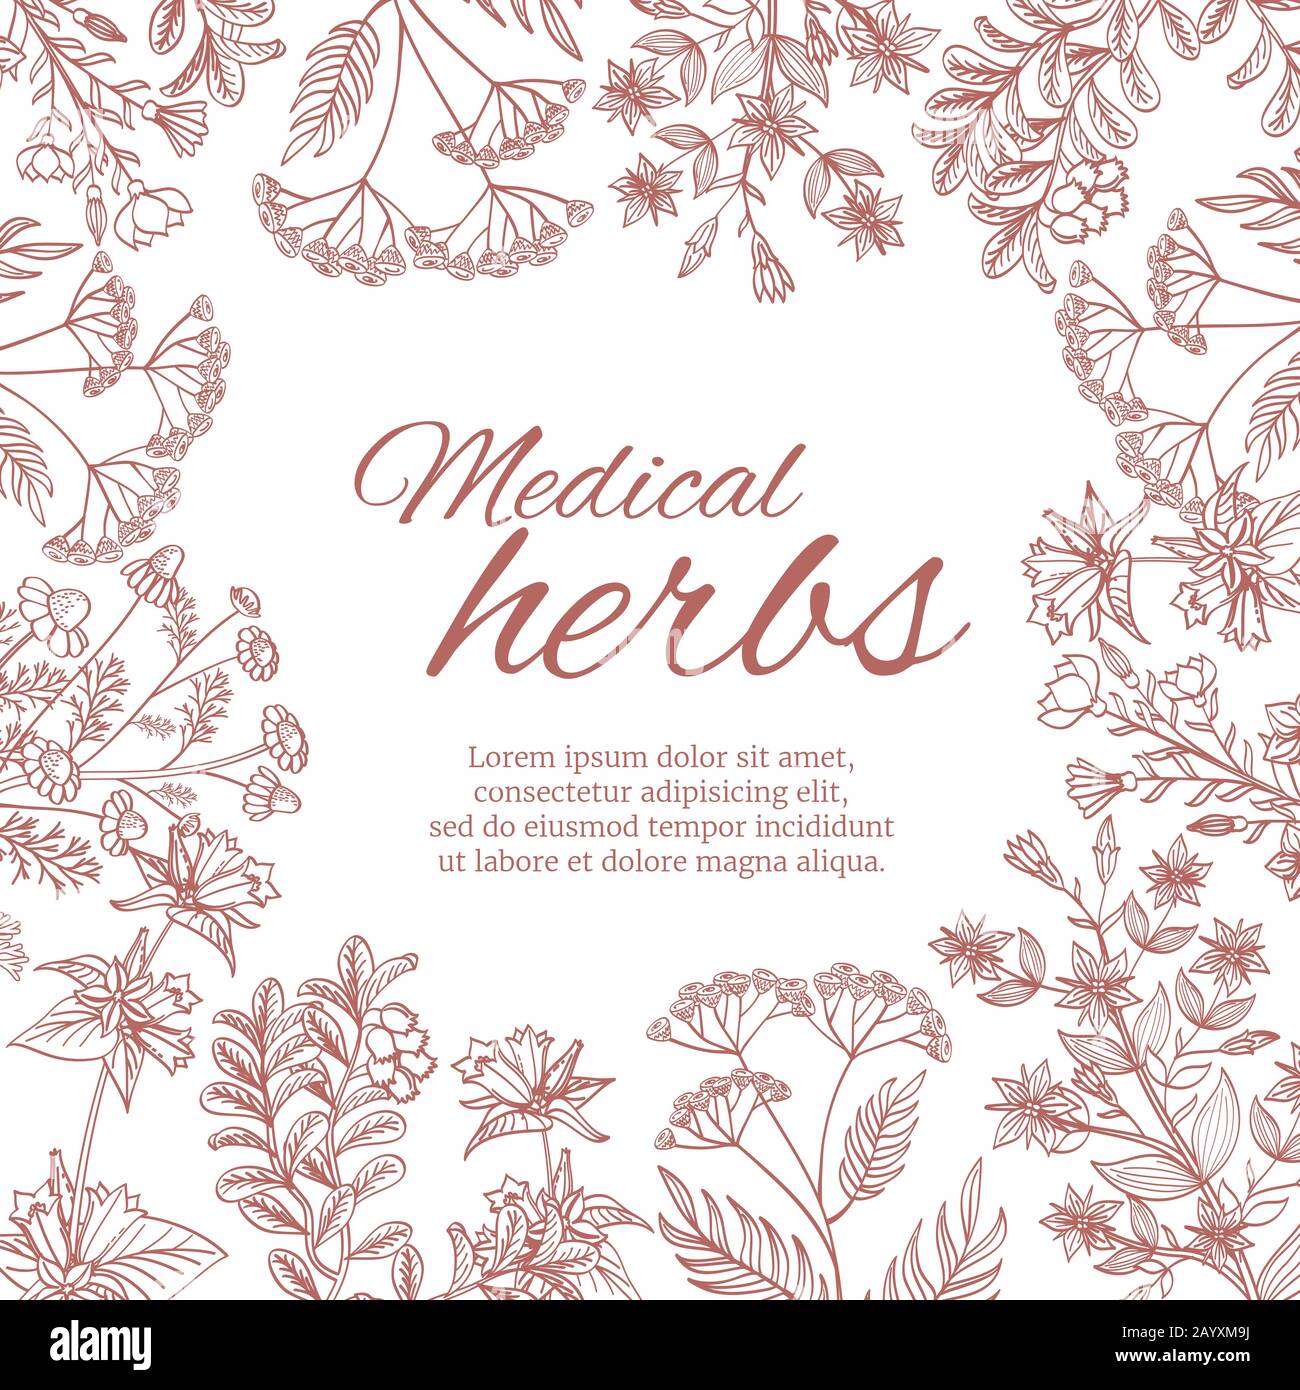 Vintage decorative background with medicinal organic healing plants. Medical herb banner template with herbal botanical flower. Vector illustration Stock Vector